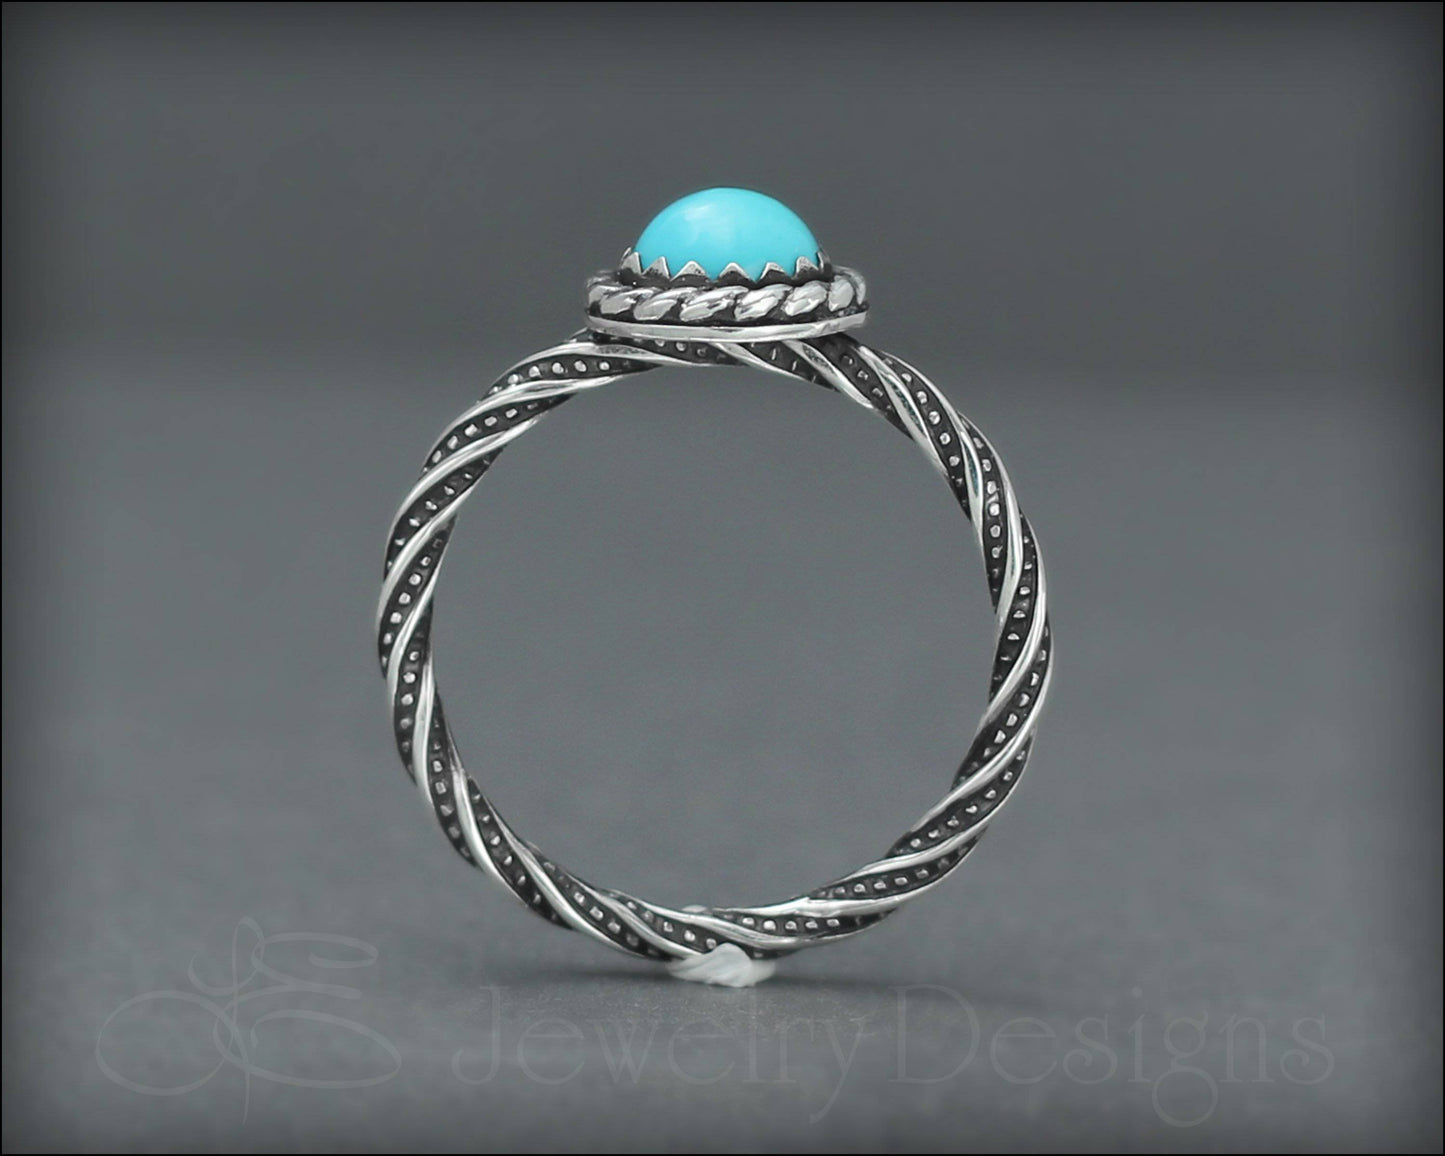 Twisted Sterling Turquoise Ring - LE Jewelry Designs